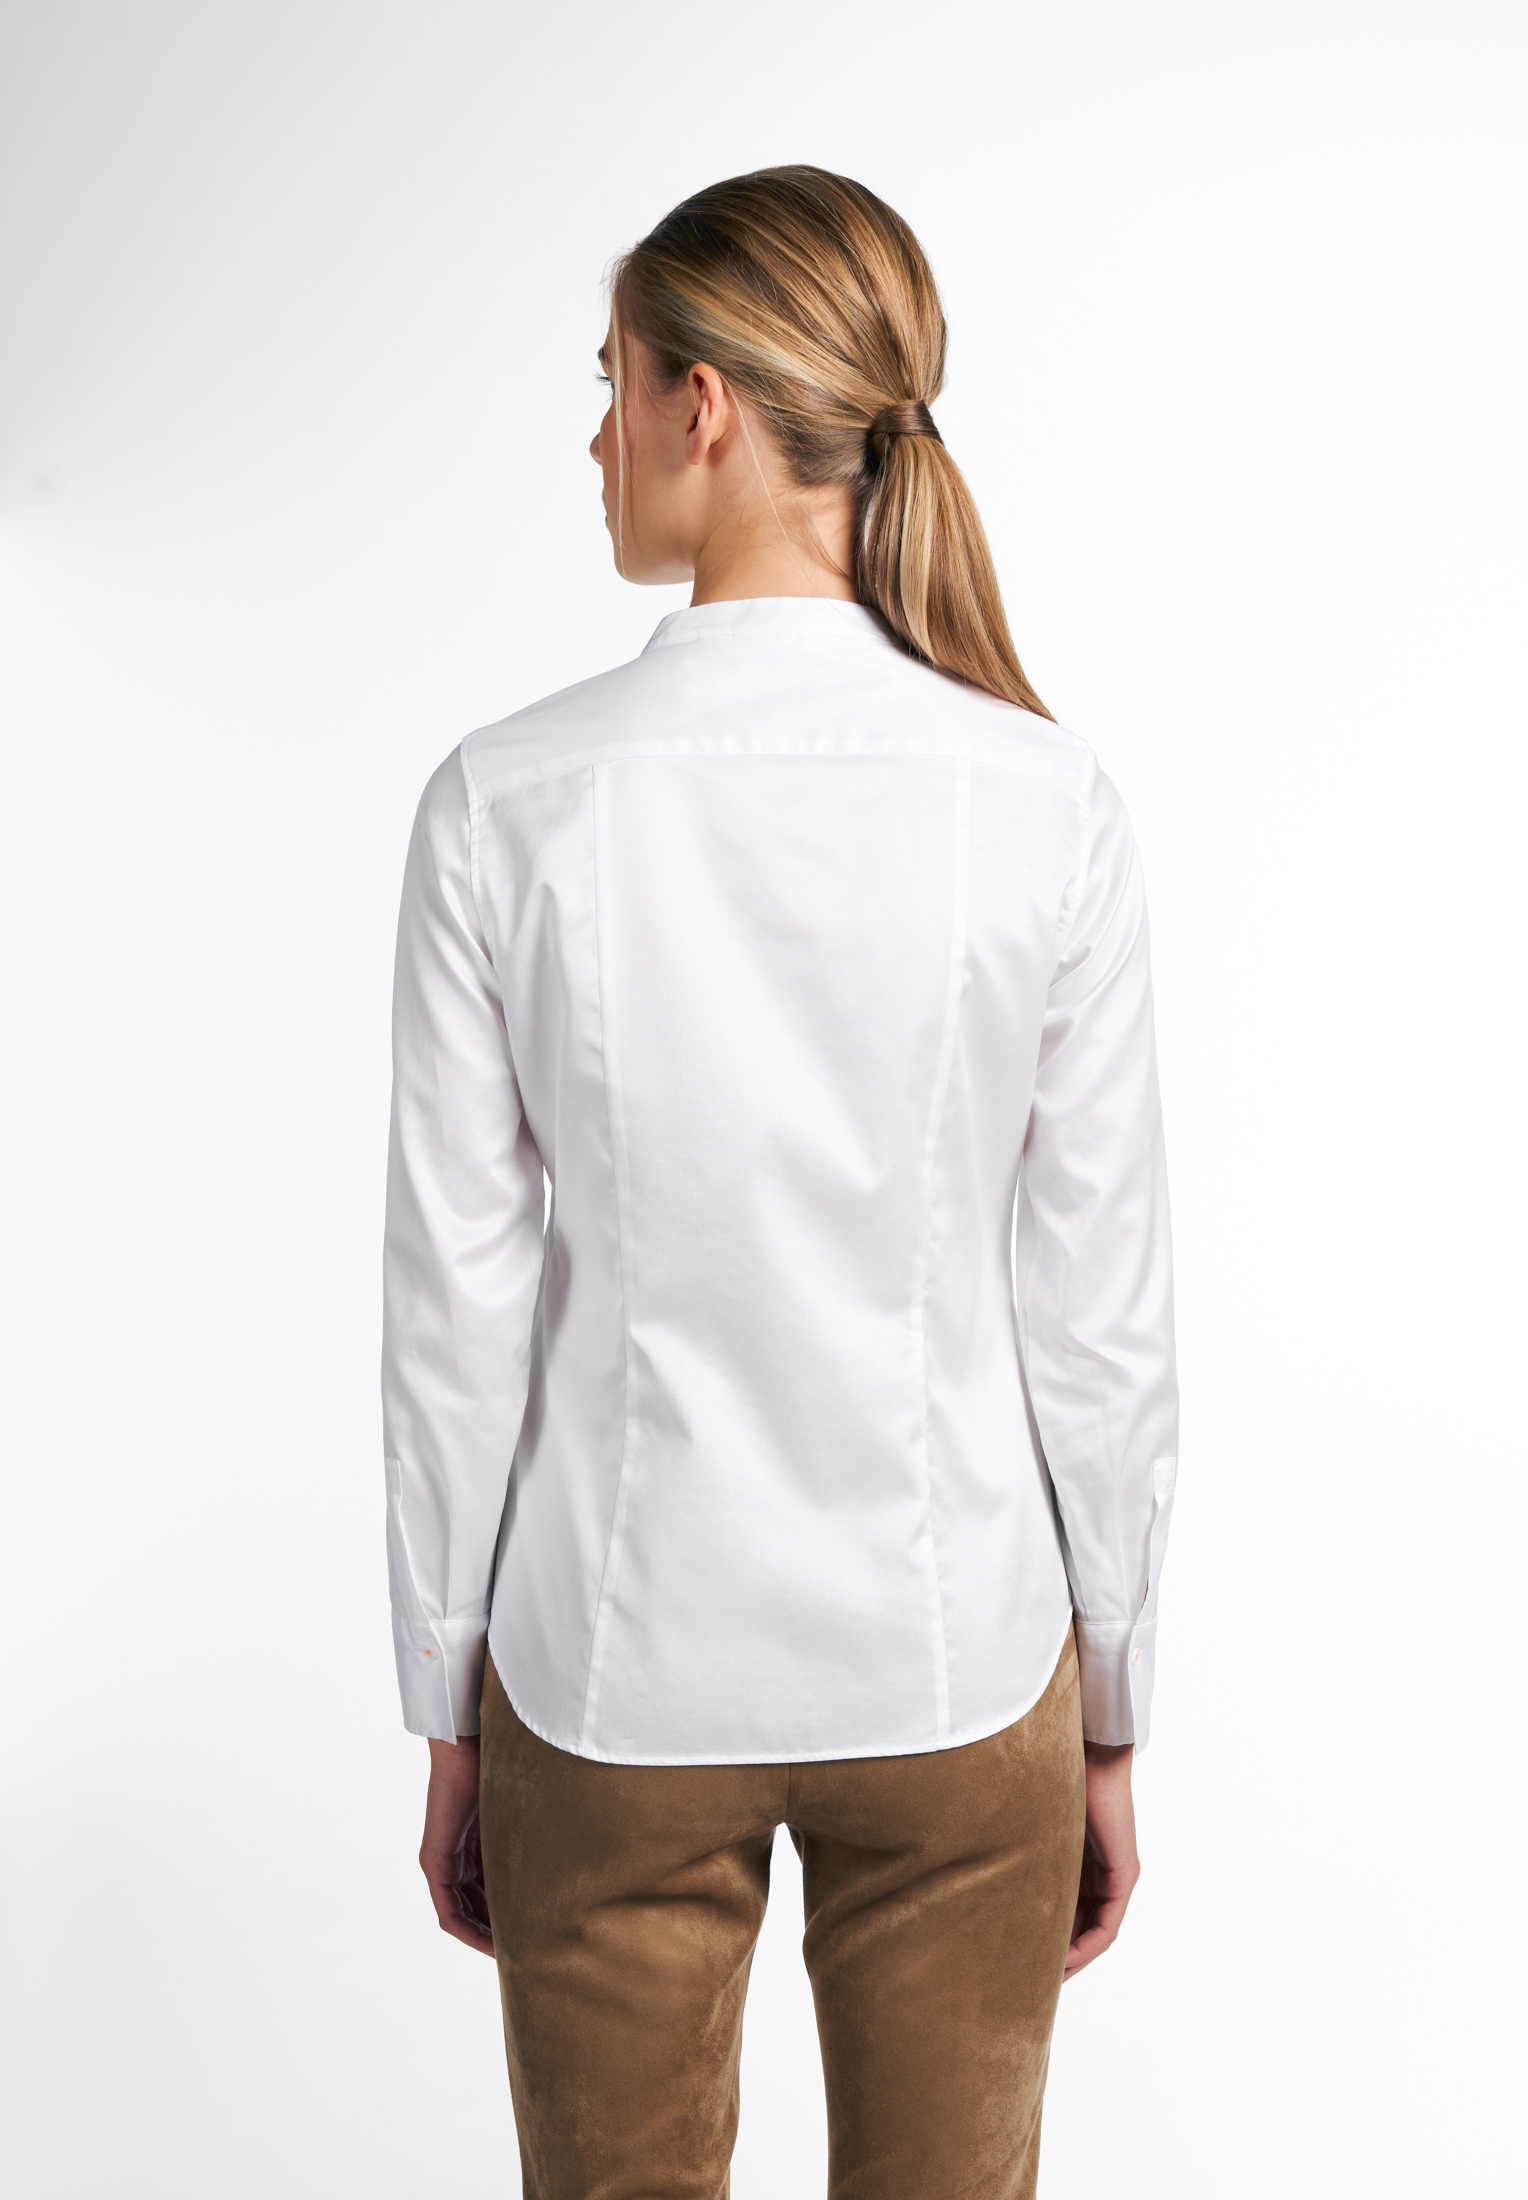 38 unifarben Luxury Soft Langarm off-white | in | | 2BL03742-00-02-38-1/1 Bluse off-white Shirt |